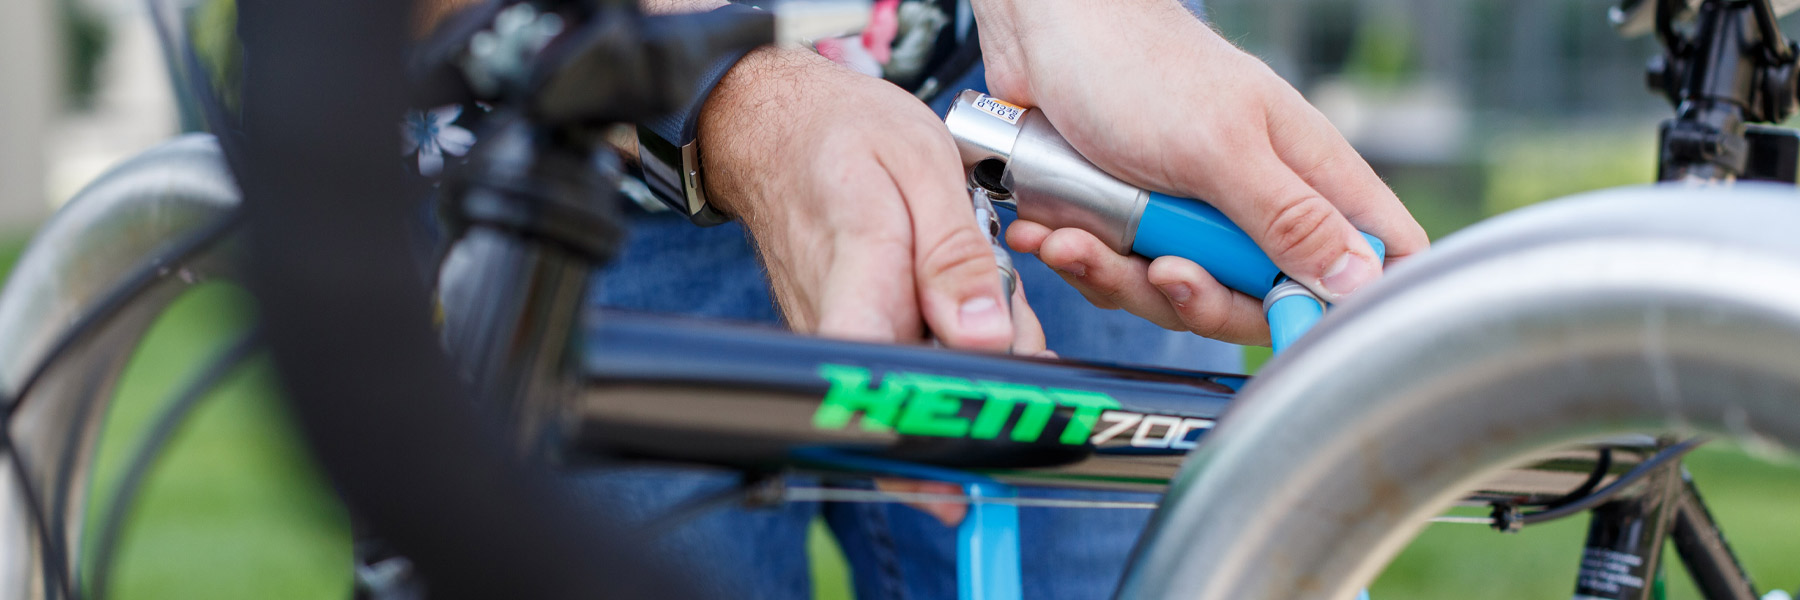 A brightly colored, shallow-focus close-up image of a young man securing his bicycle with a pastel blue U-lock.